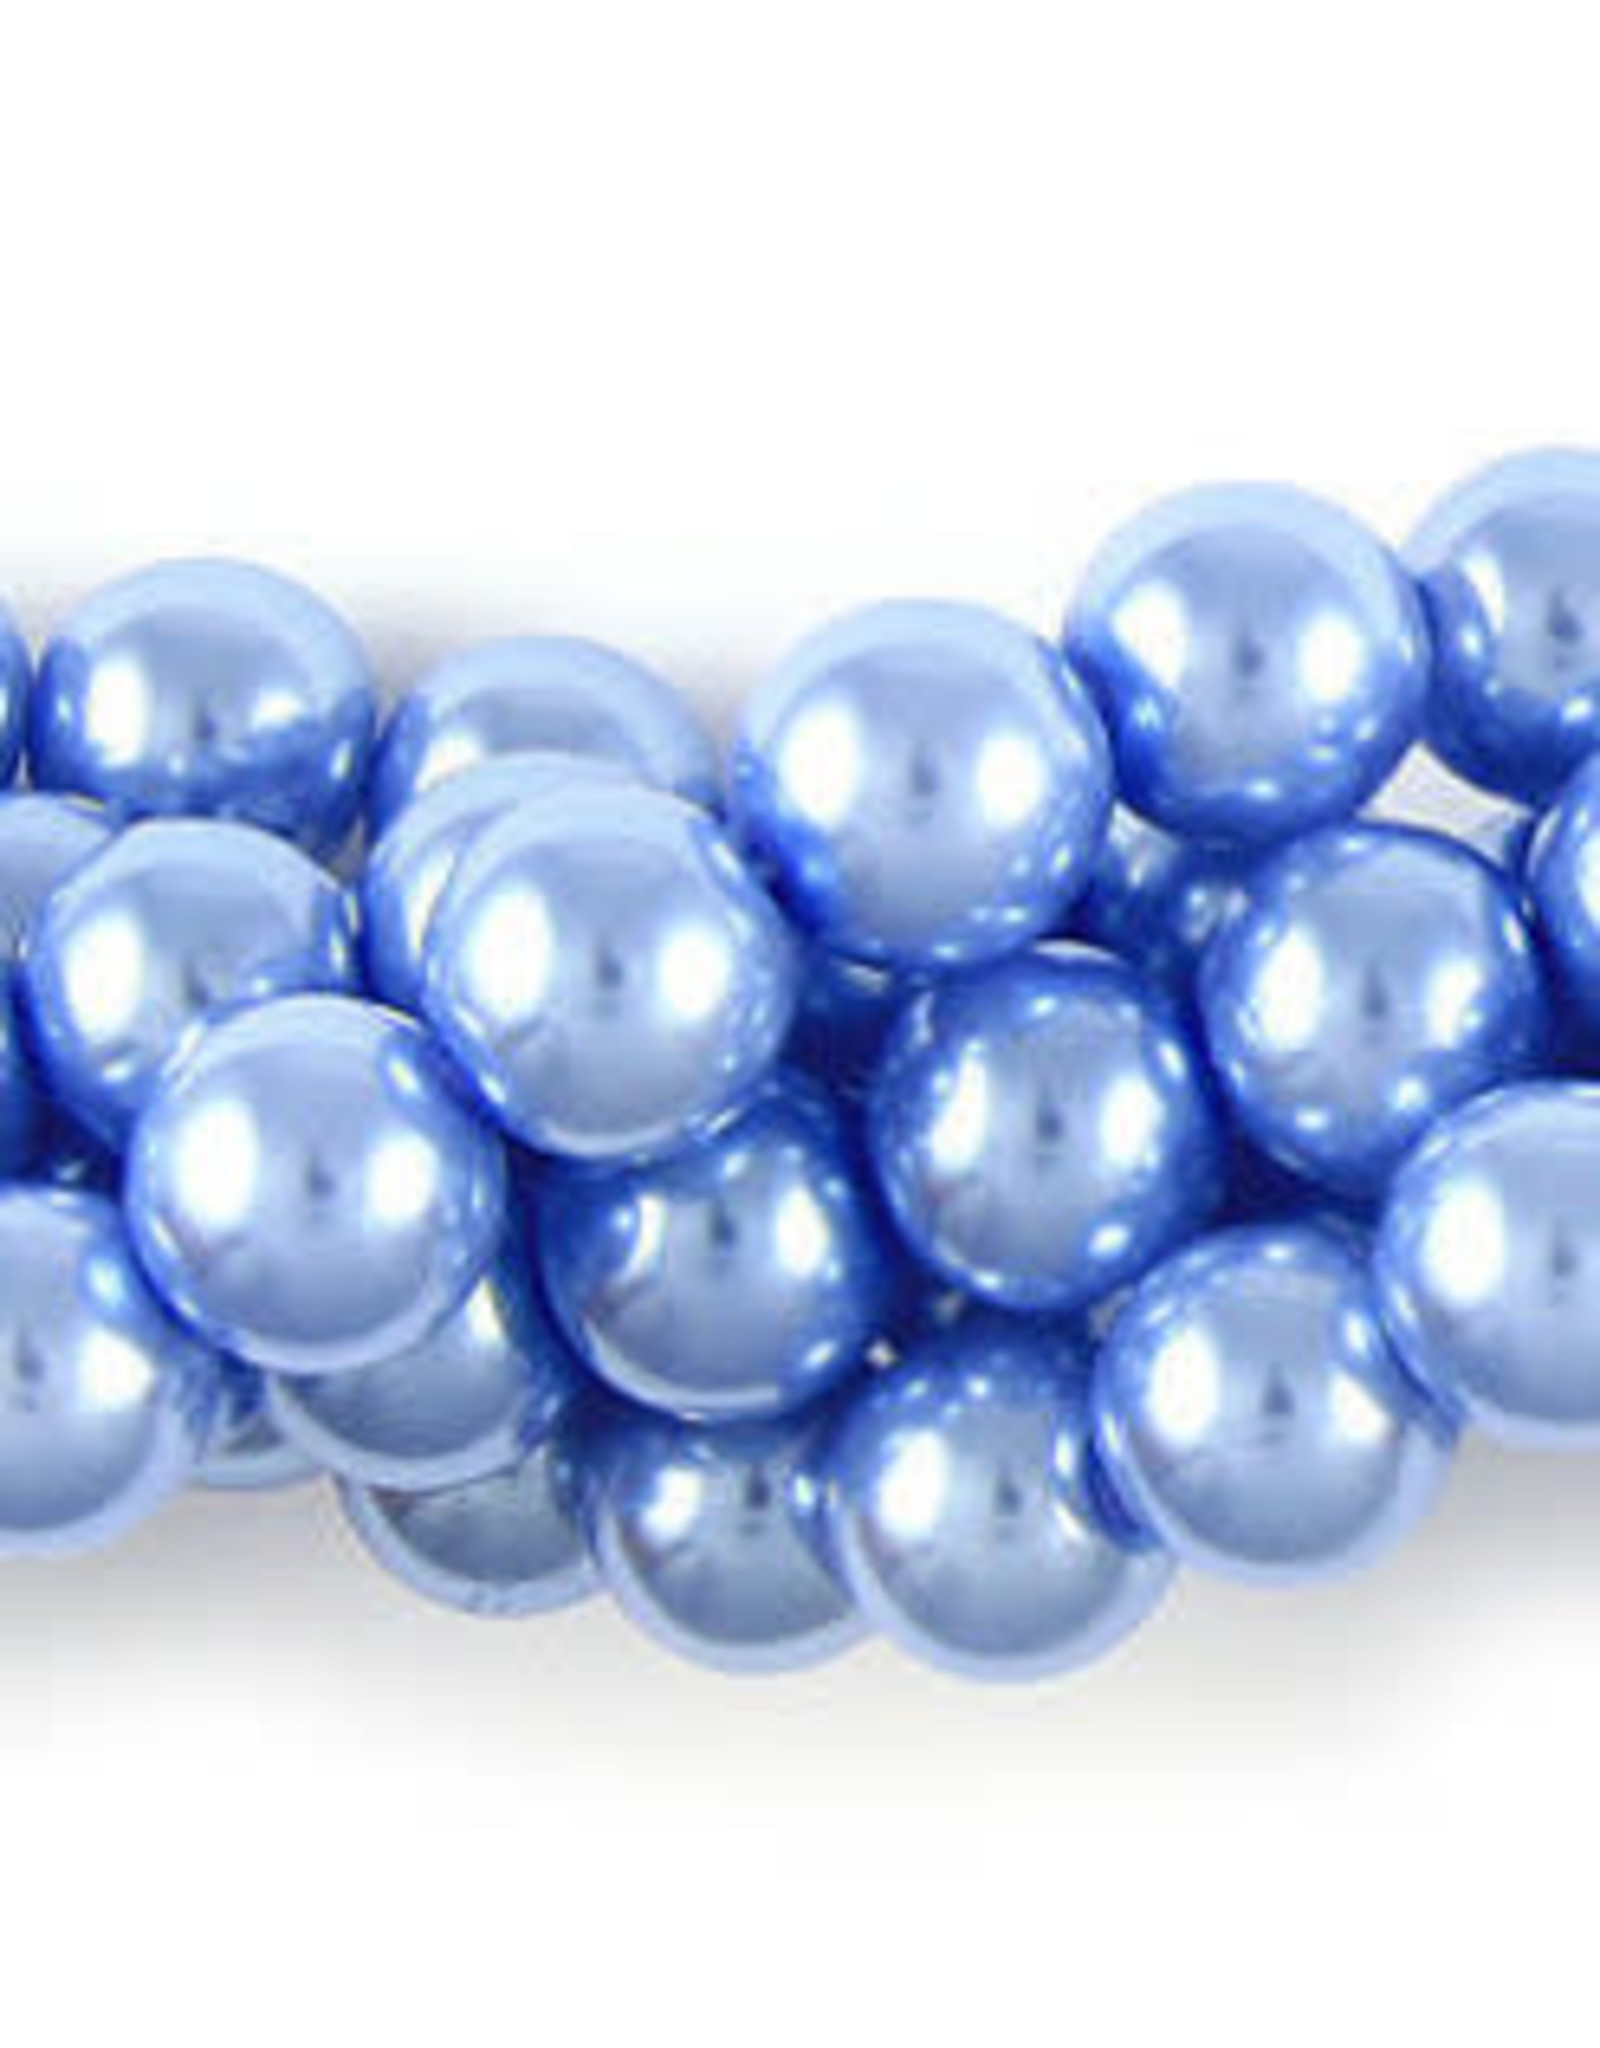 Glass Pearls  Light Blue Round 4mm Strand  about x100